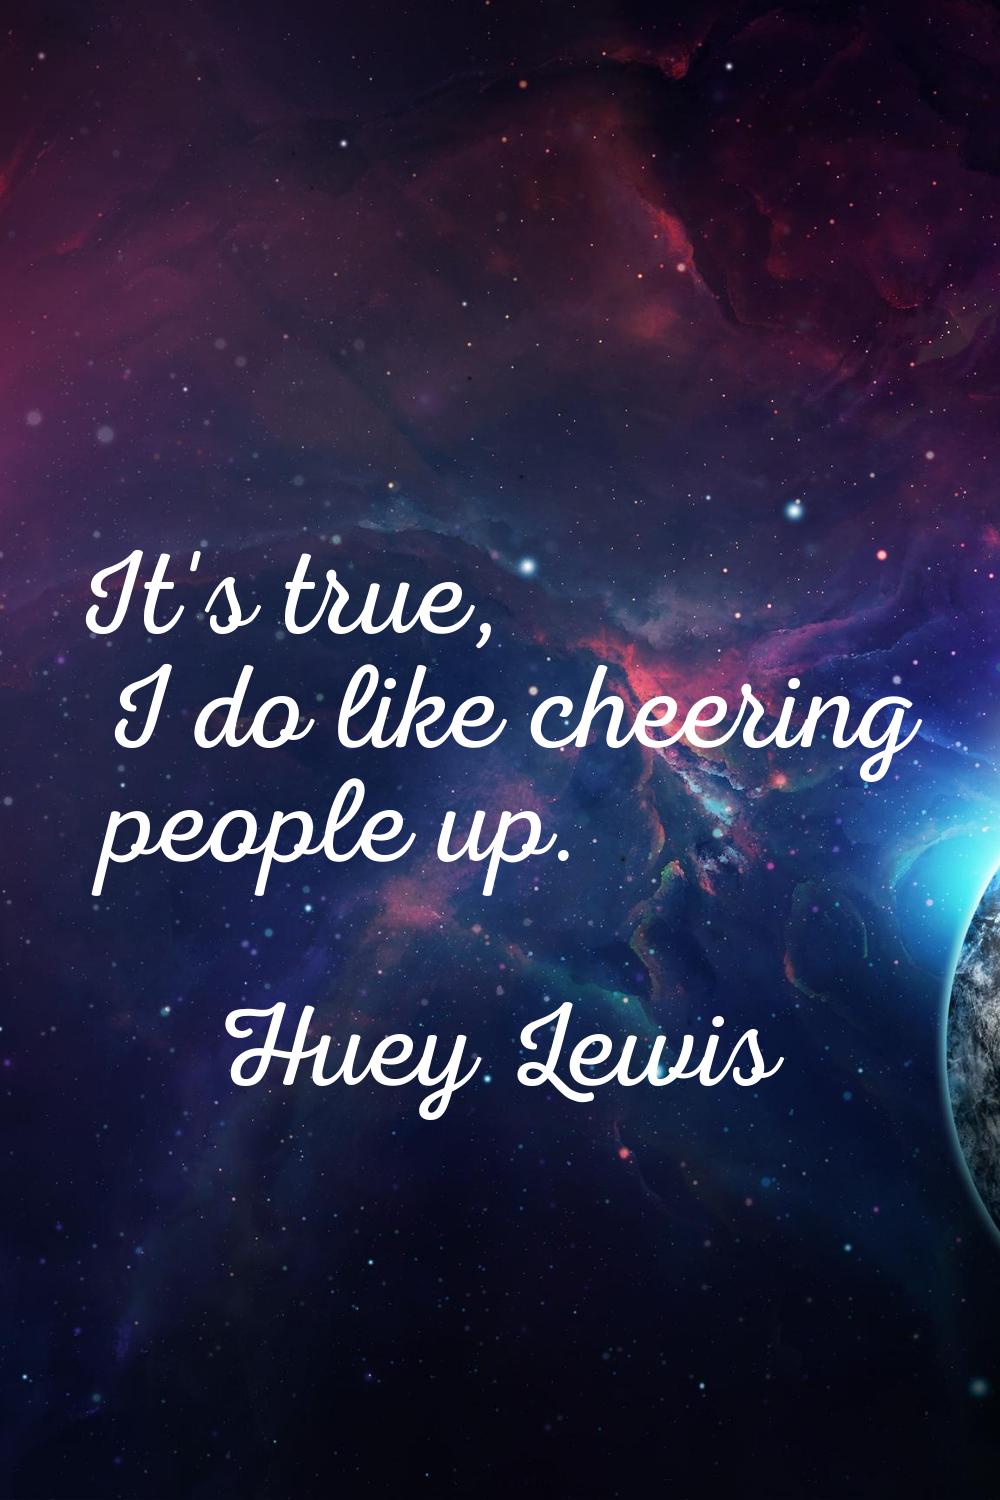 It's true, I do like cheering people up.